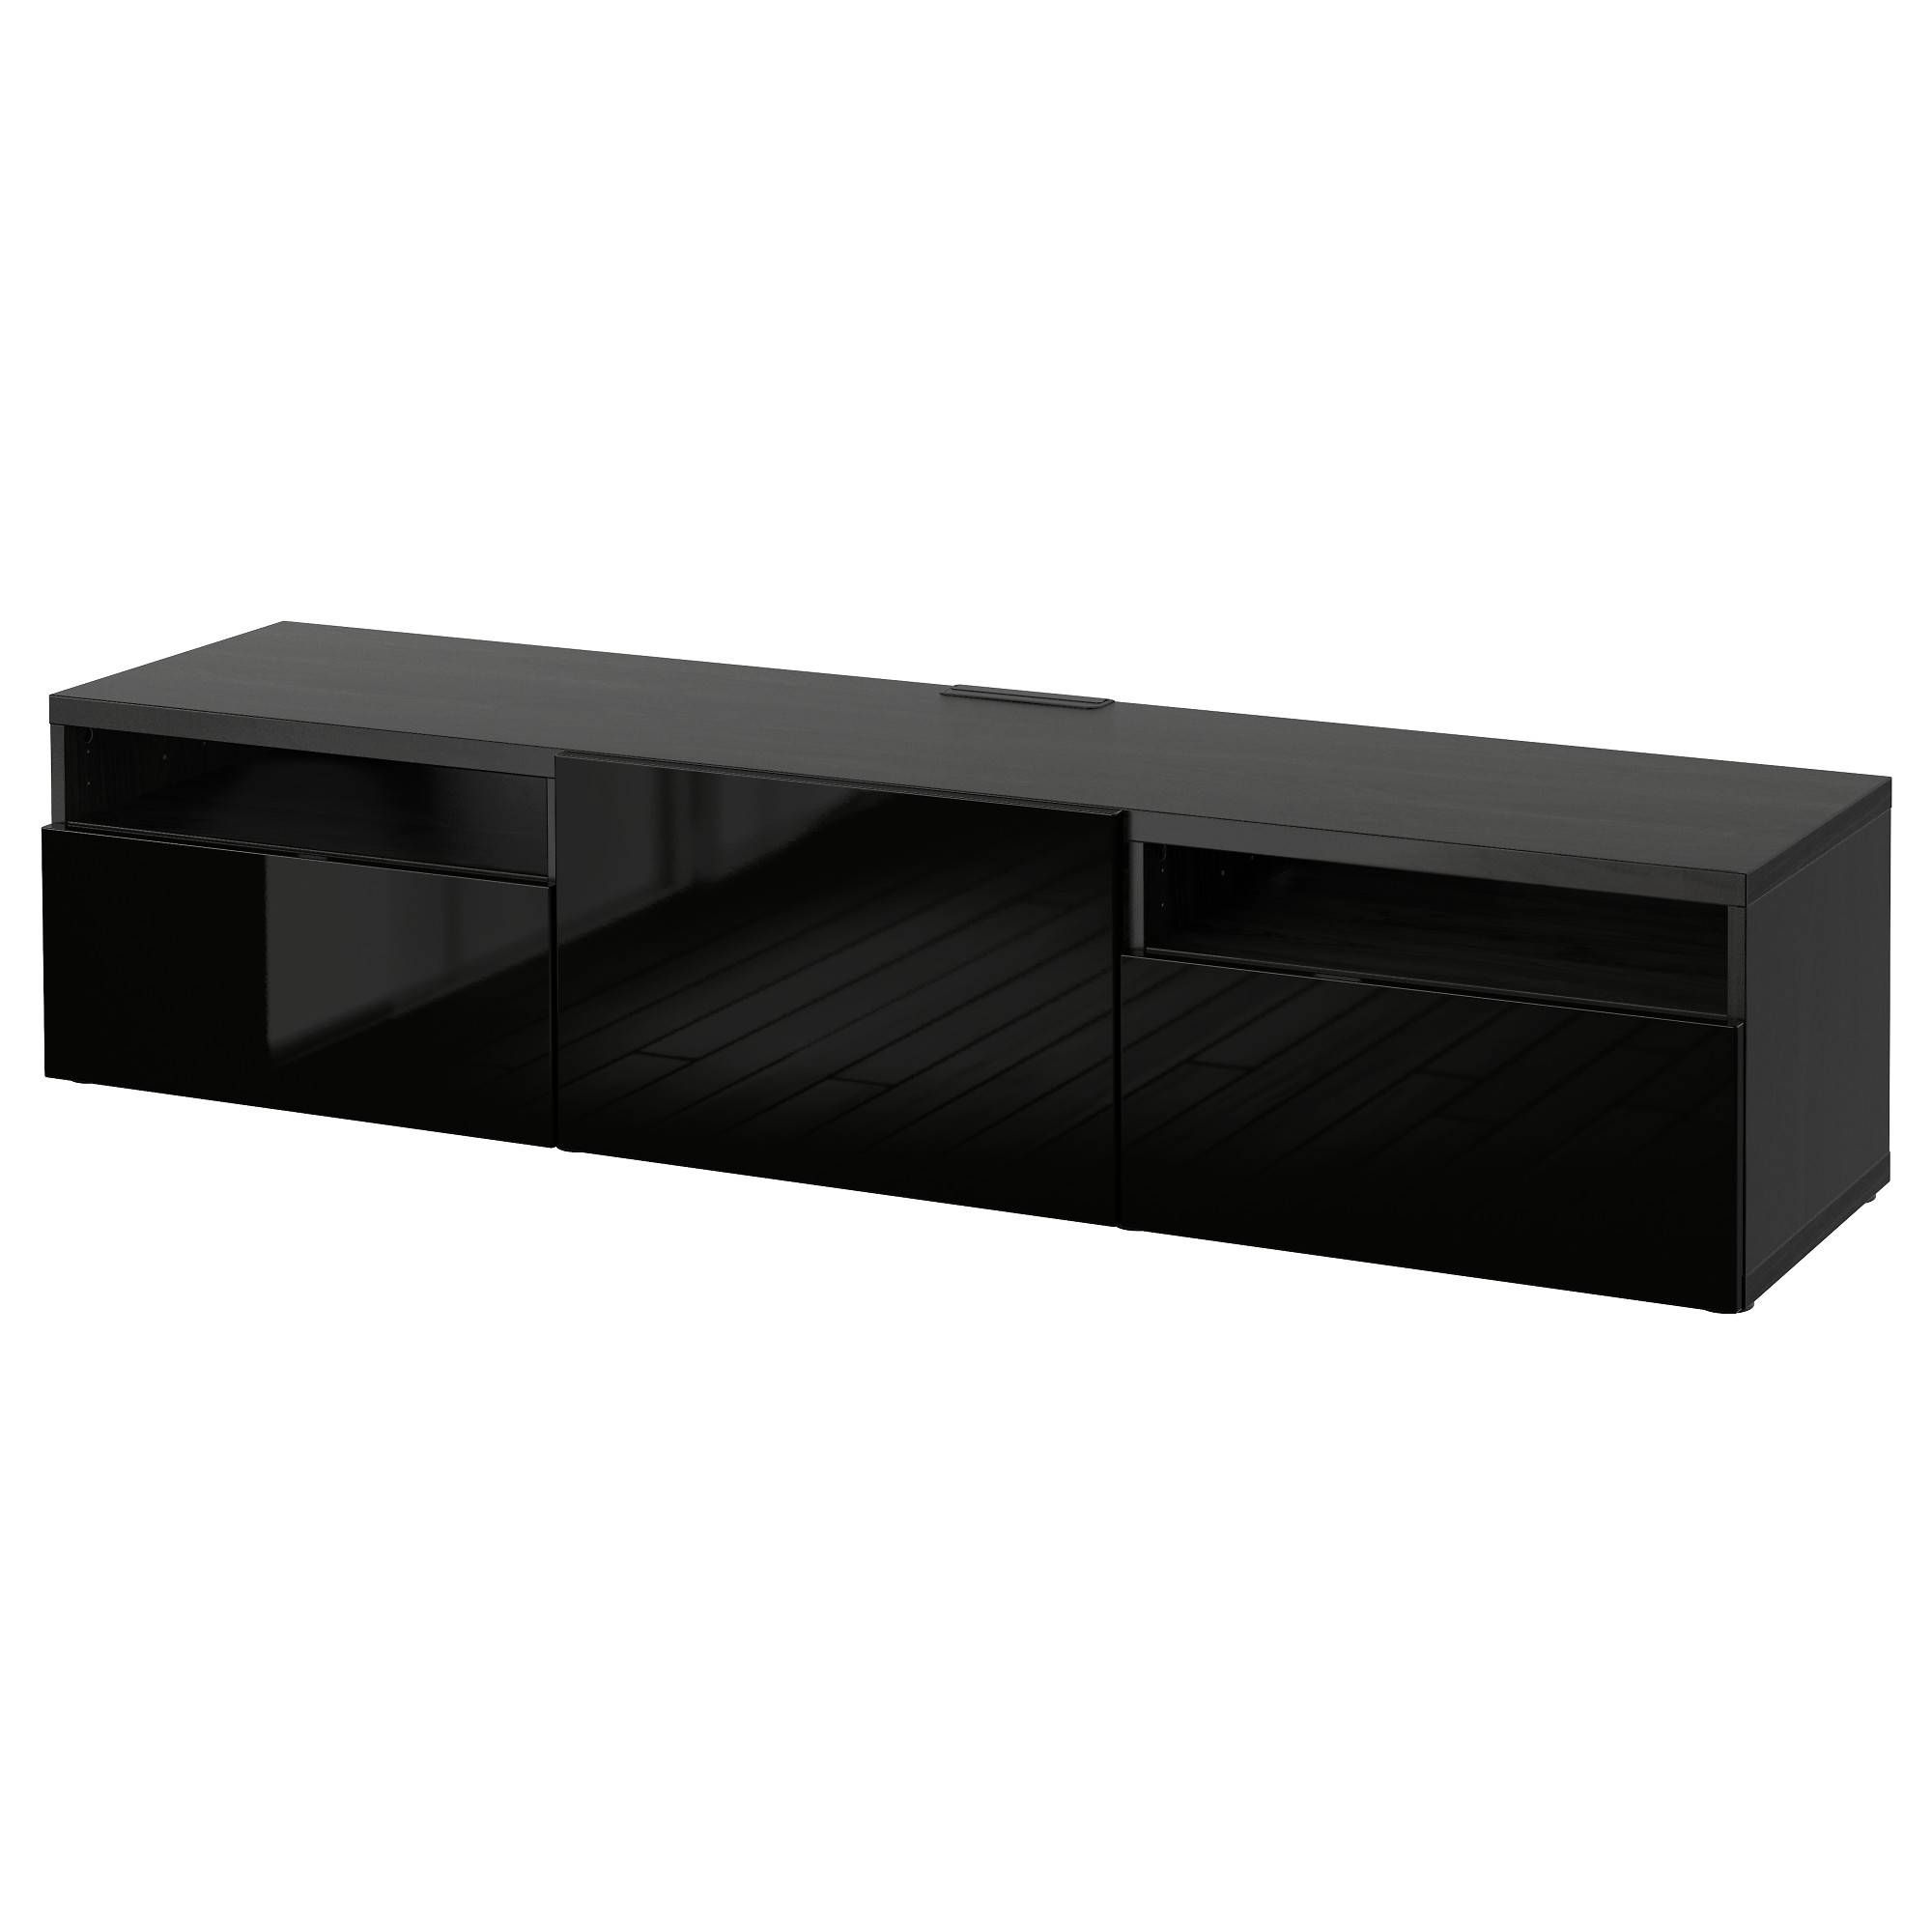 Large Tv Stands & Entertainment Centers – Ikea Intended For 60 Cm High Tv Stand (View 10 of 15)